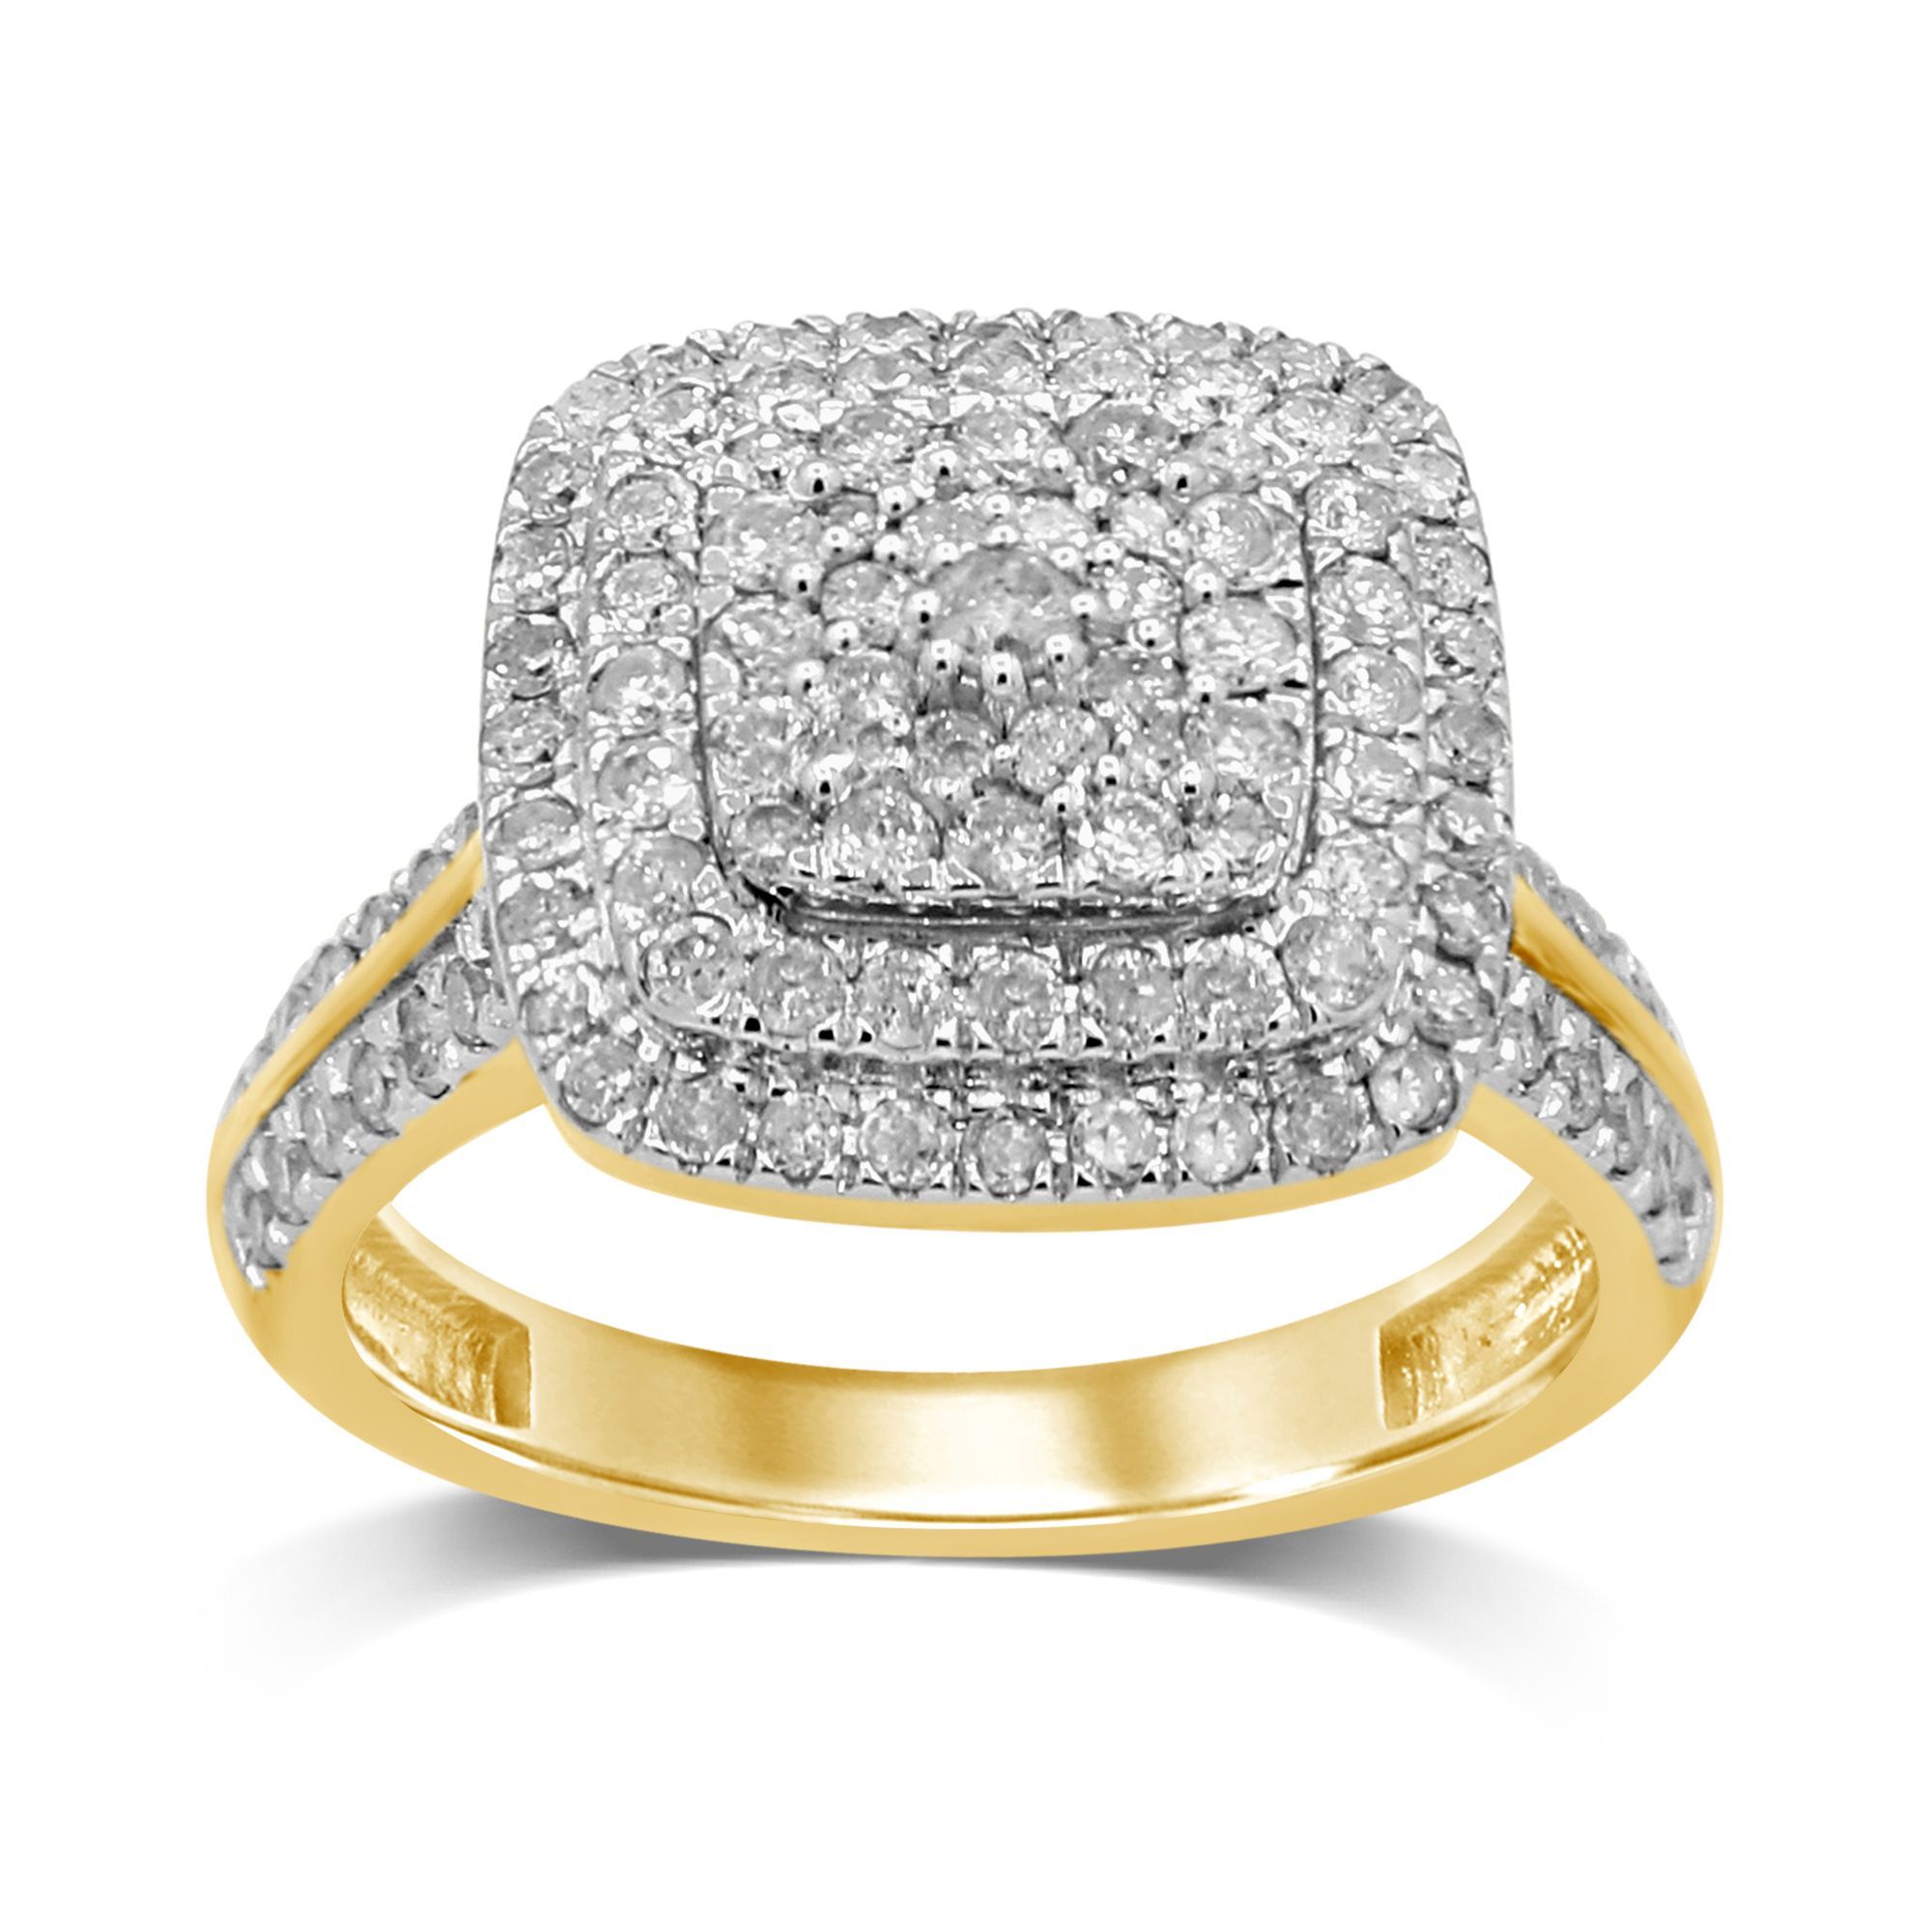 Brilliant Square Look Ring with 1.00ct of Diamonds in 9ct Yellow Gold Rings Bevilles 